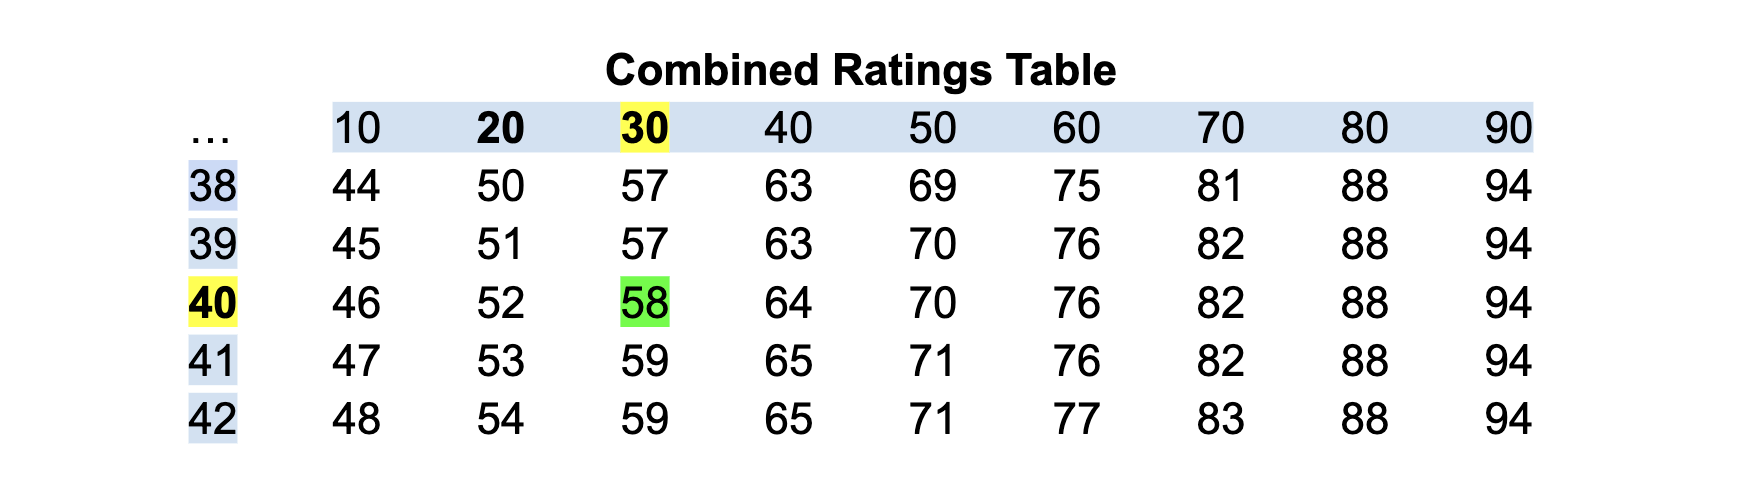 combined ratings table